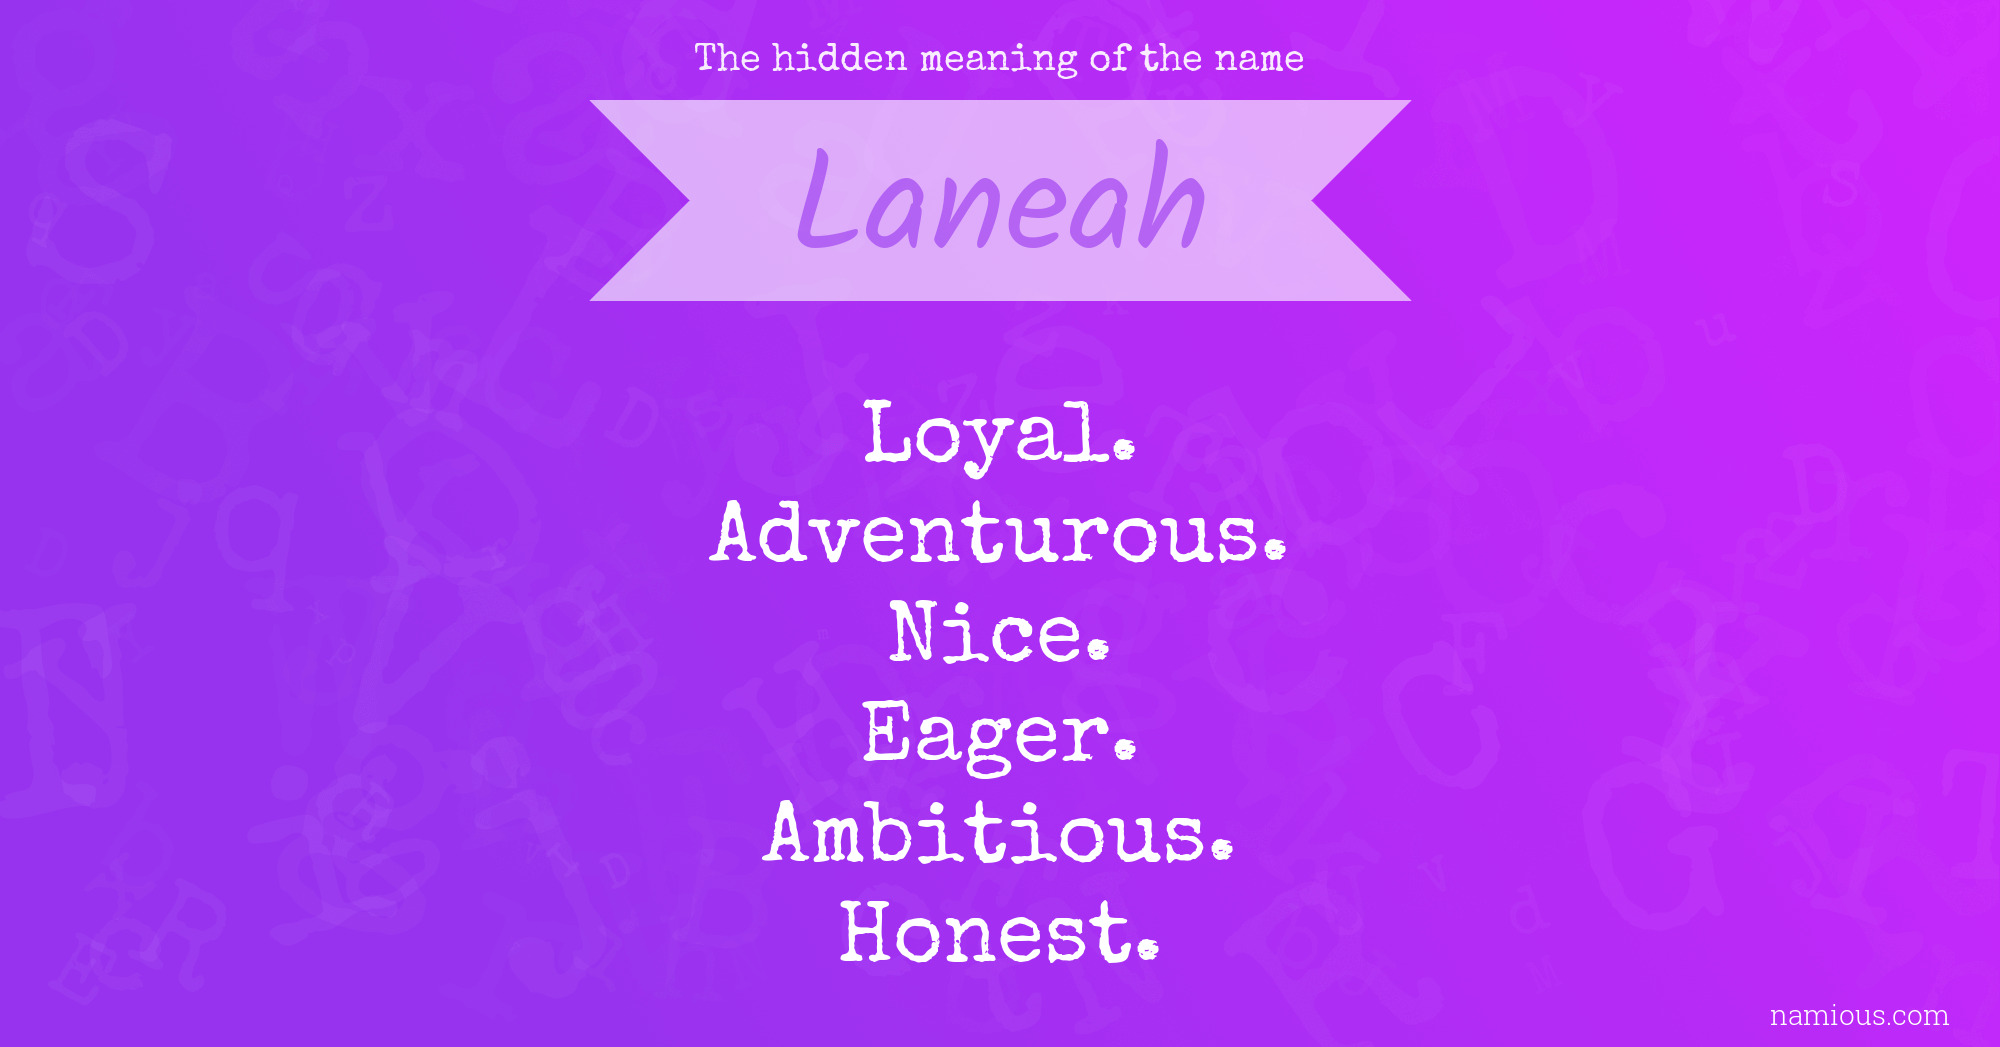 The hidden meaning of the name Laneah